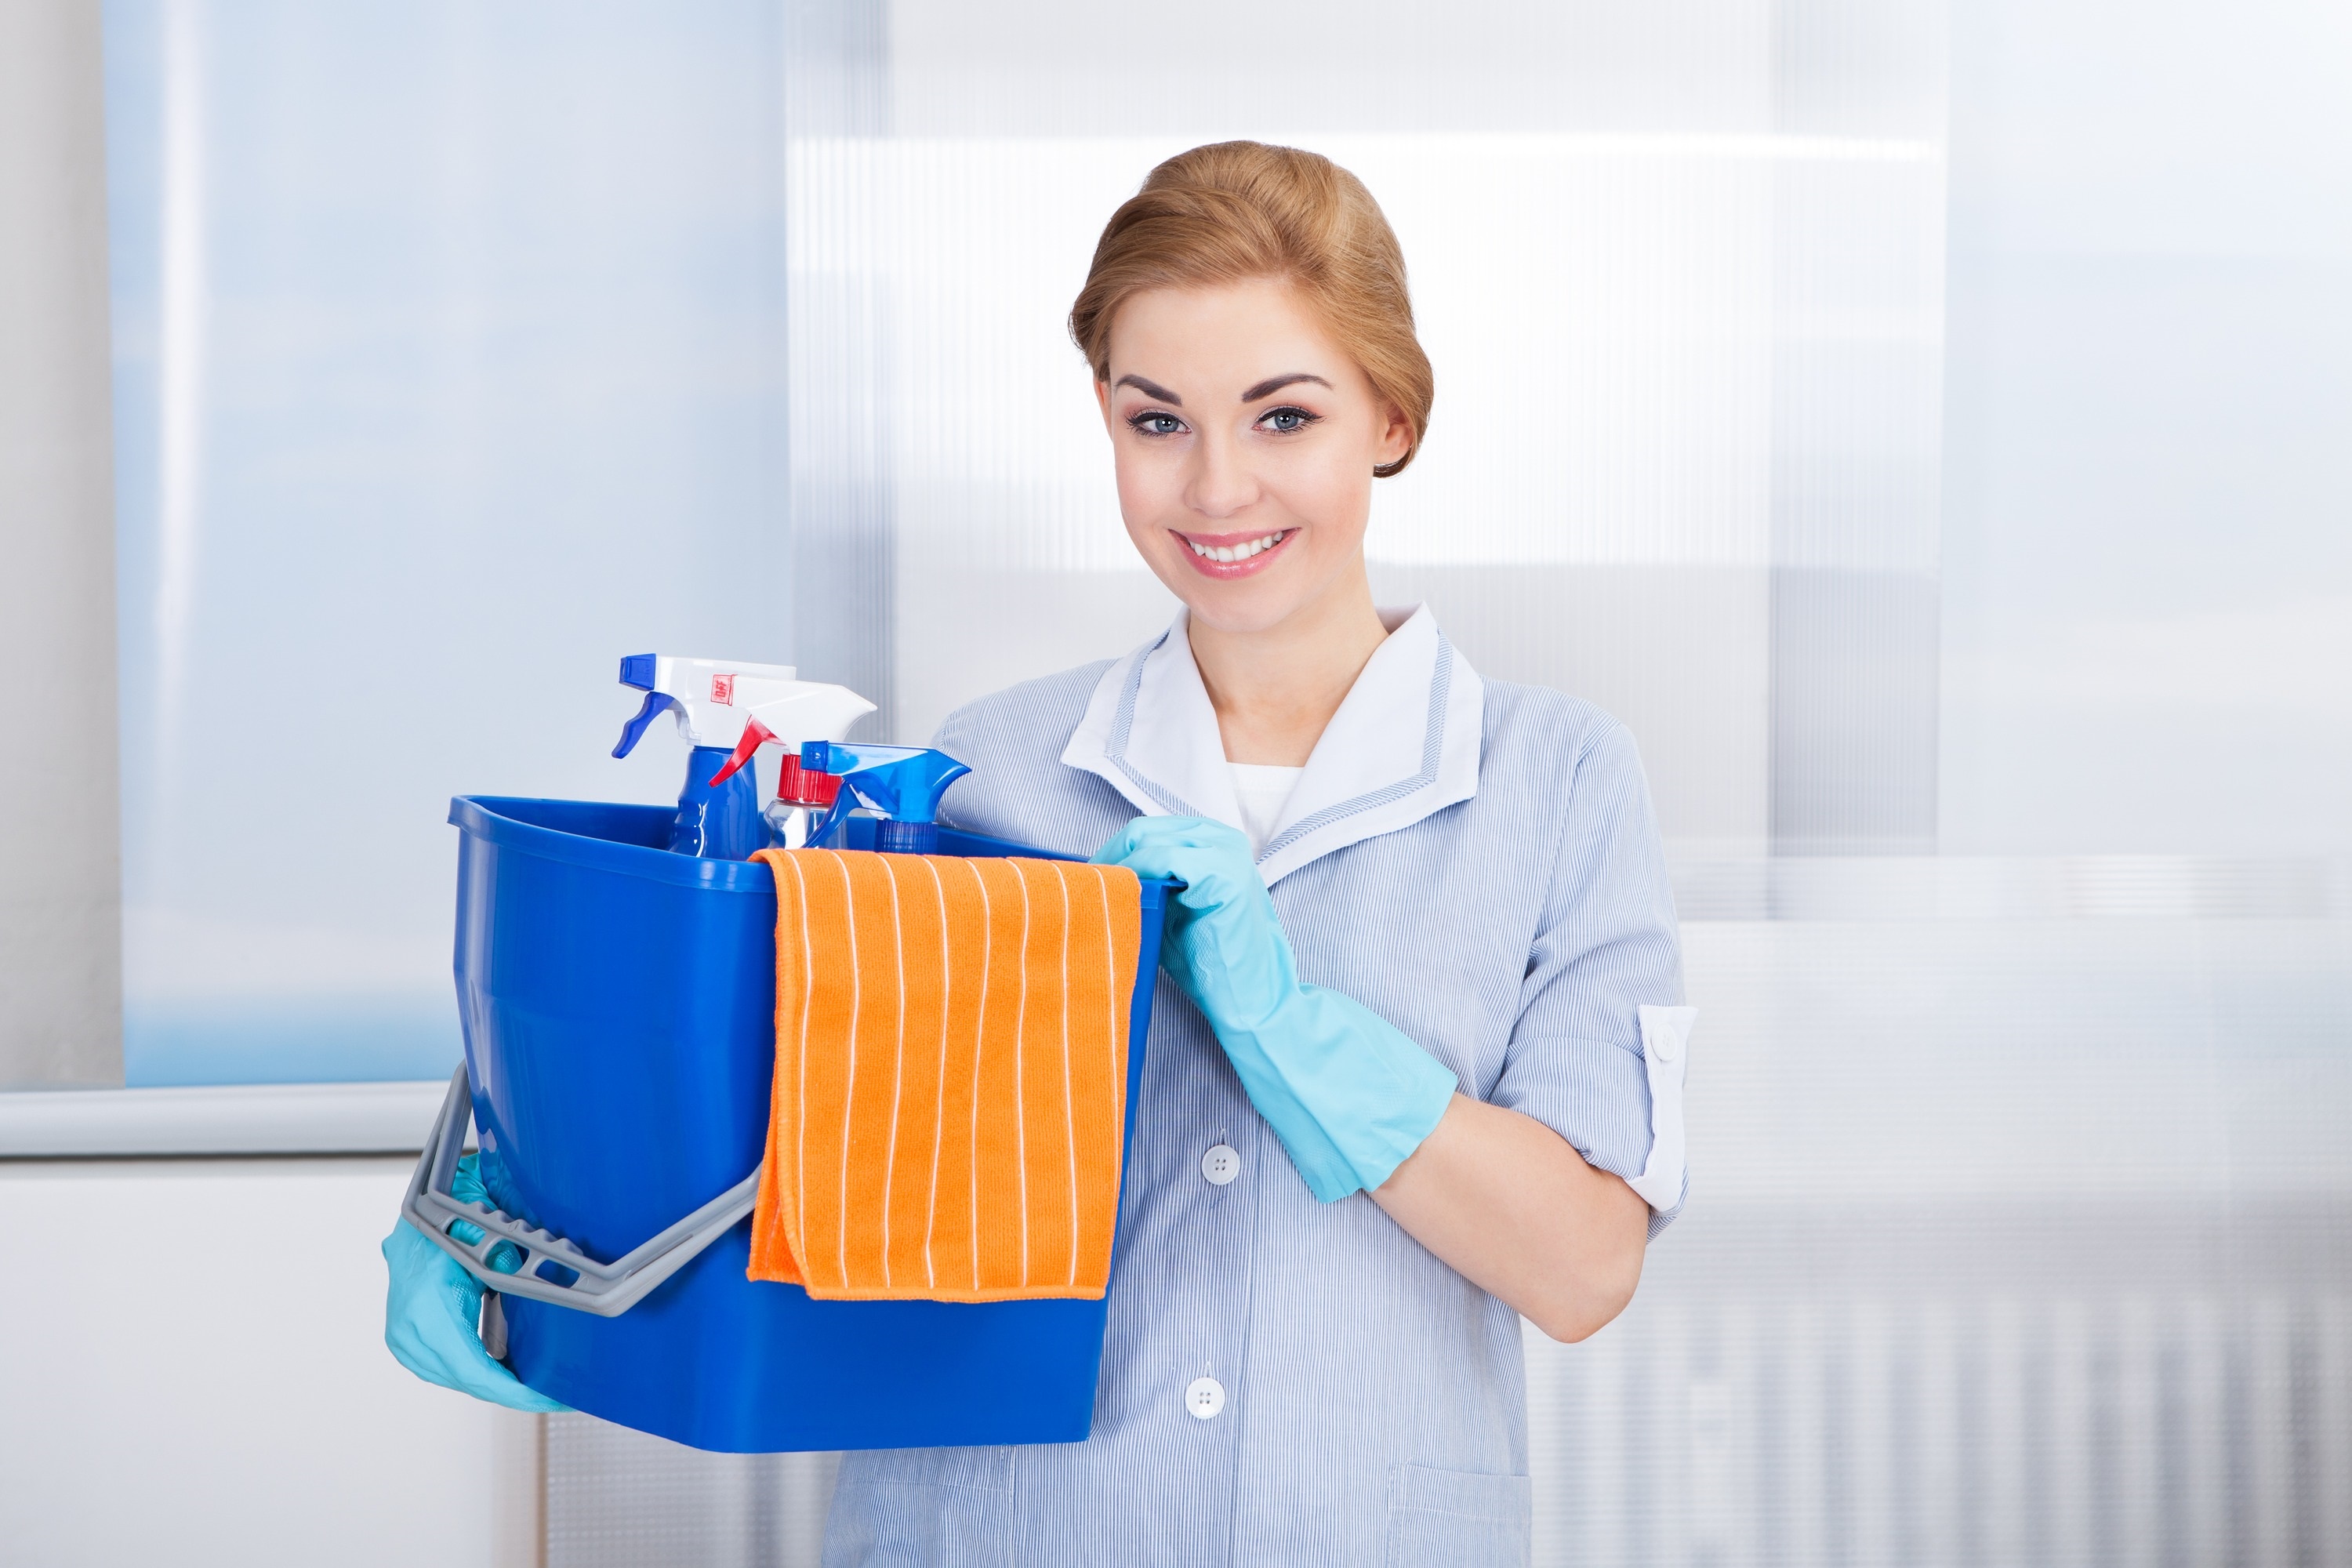 Cleaning Packages, Sensational Service Remarkable People, Maids Service,Home Cleaning, Office Maids, House maids, Cleaning Service, Office Cleaning, home cleaning, cleaning company, 15 hours per month